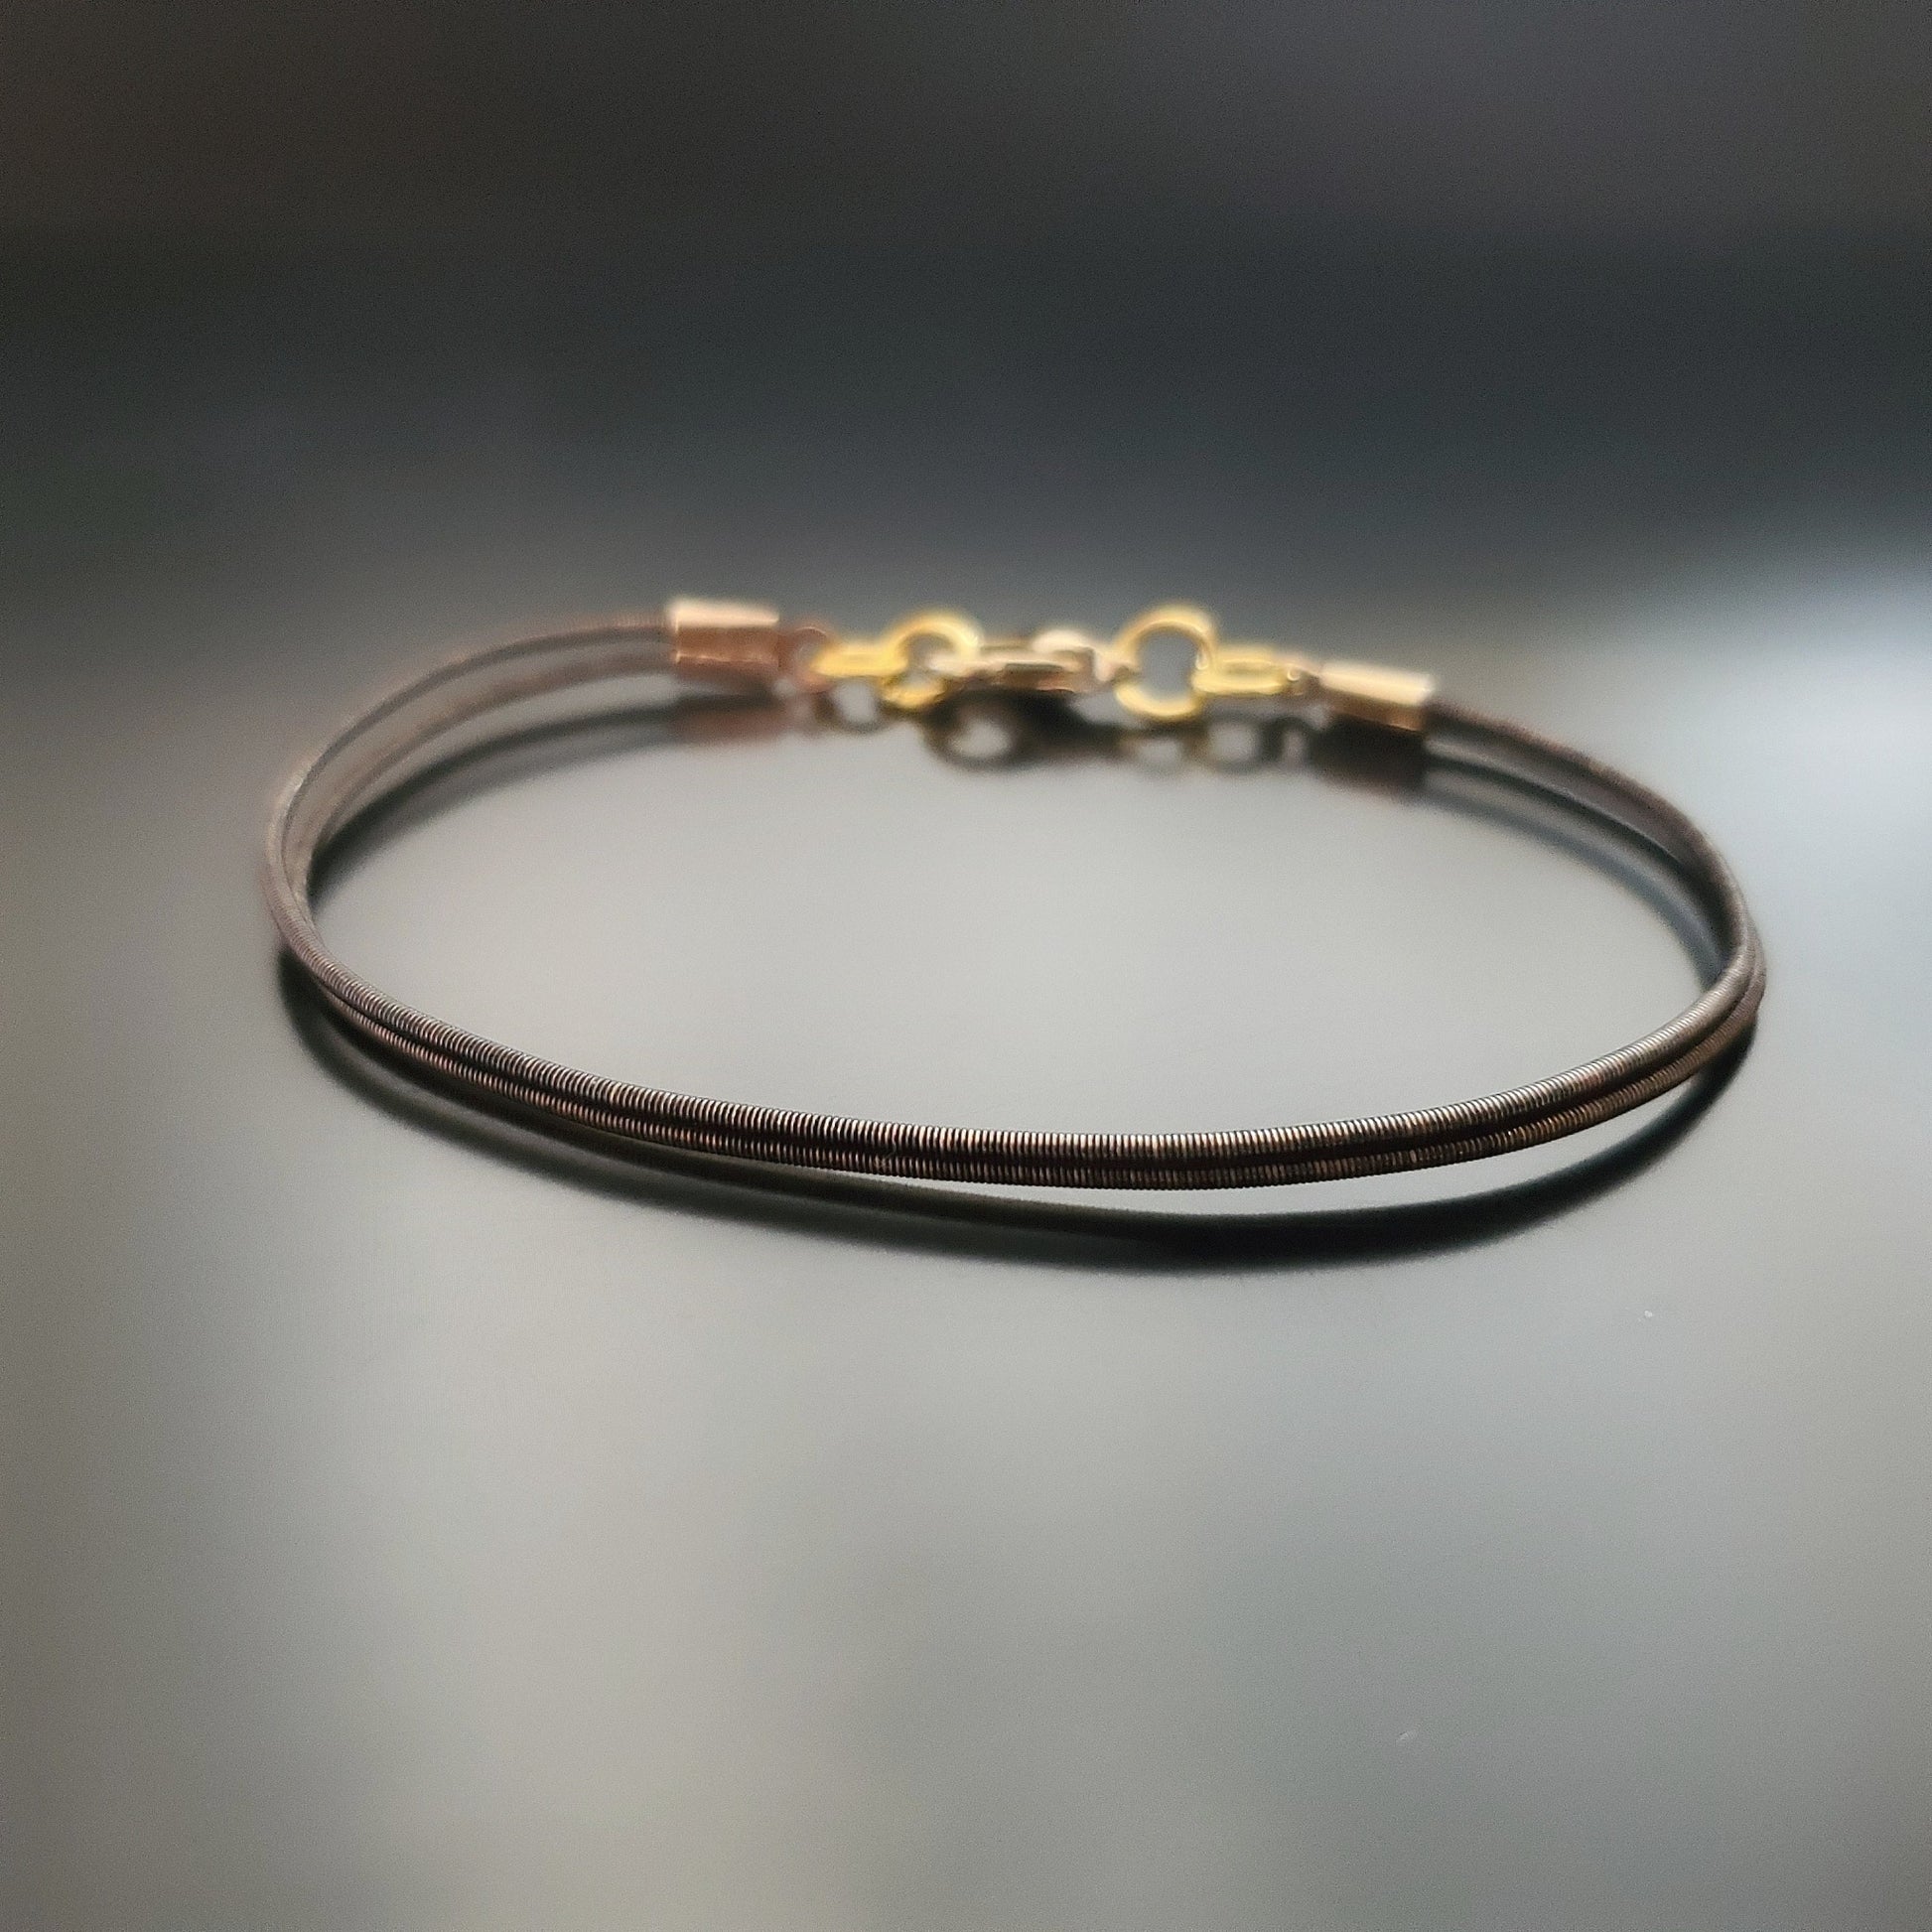 brown clasp style bracelet made from an upcycled harp string